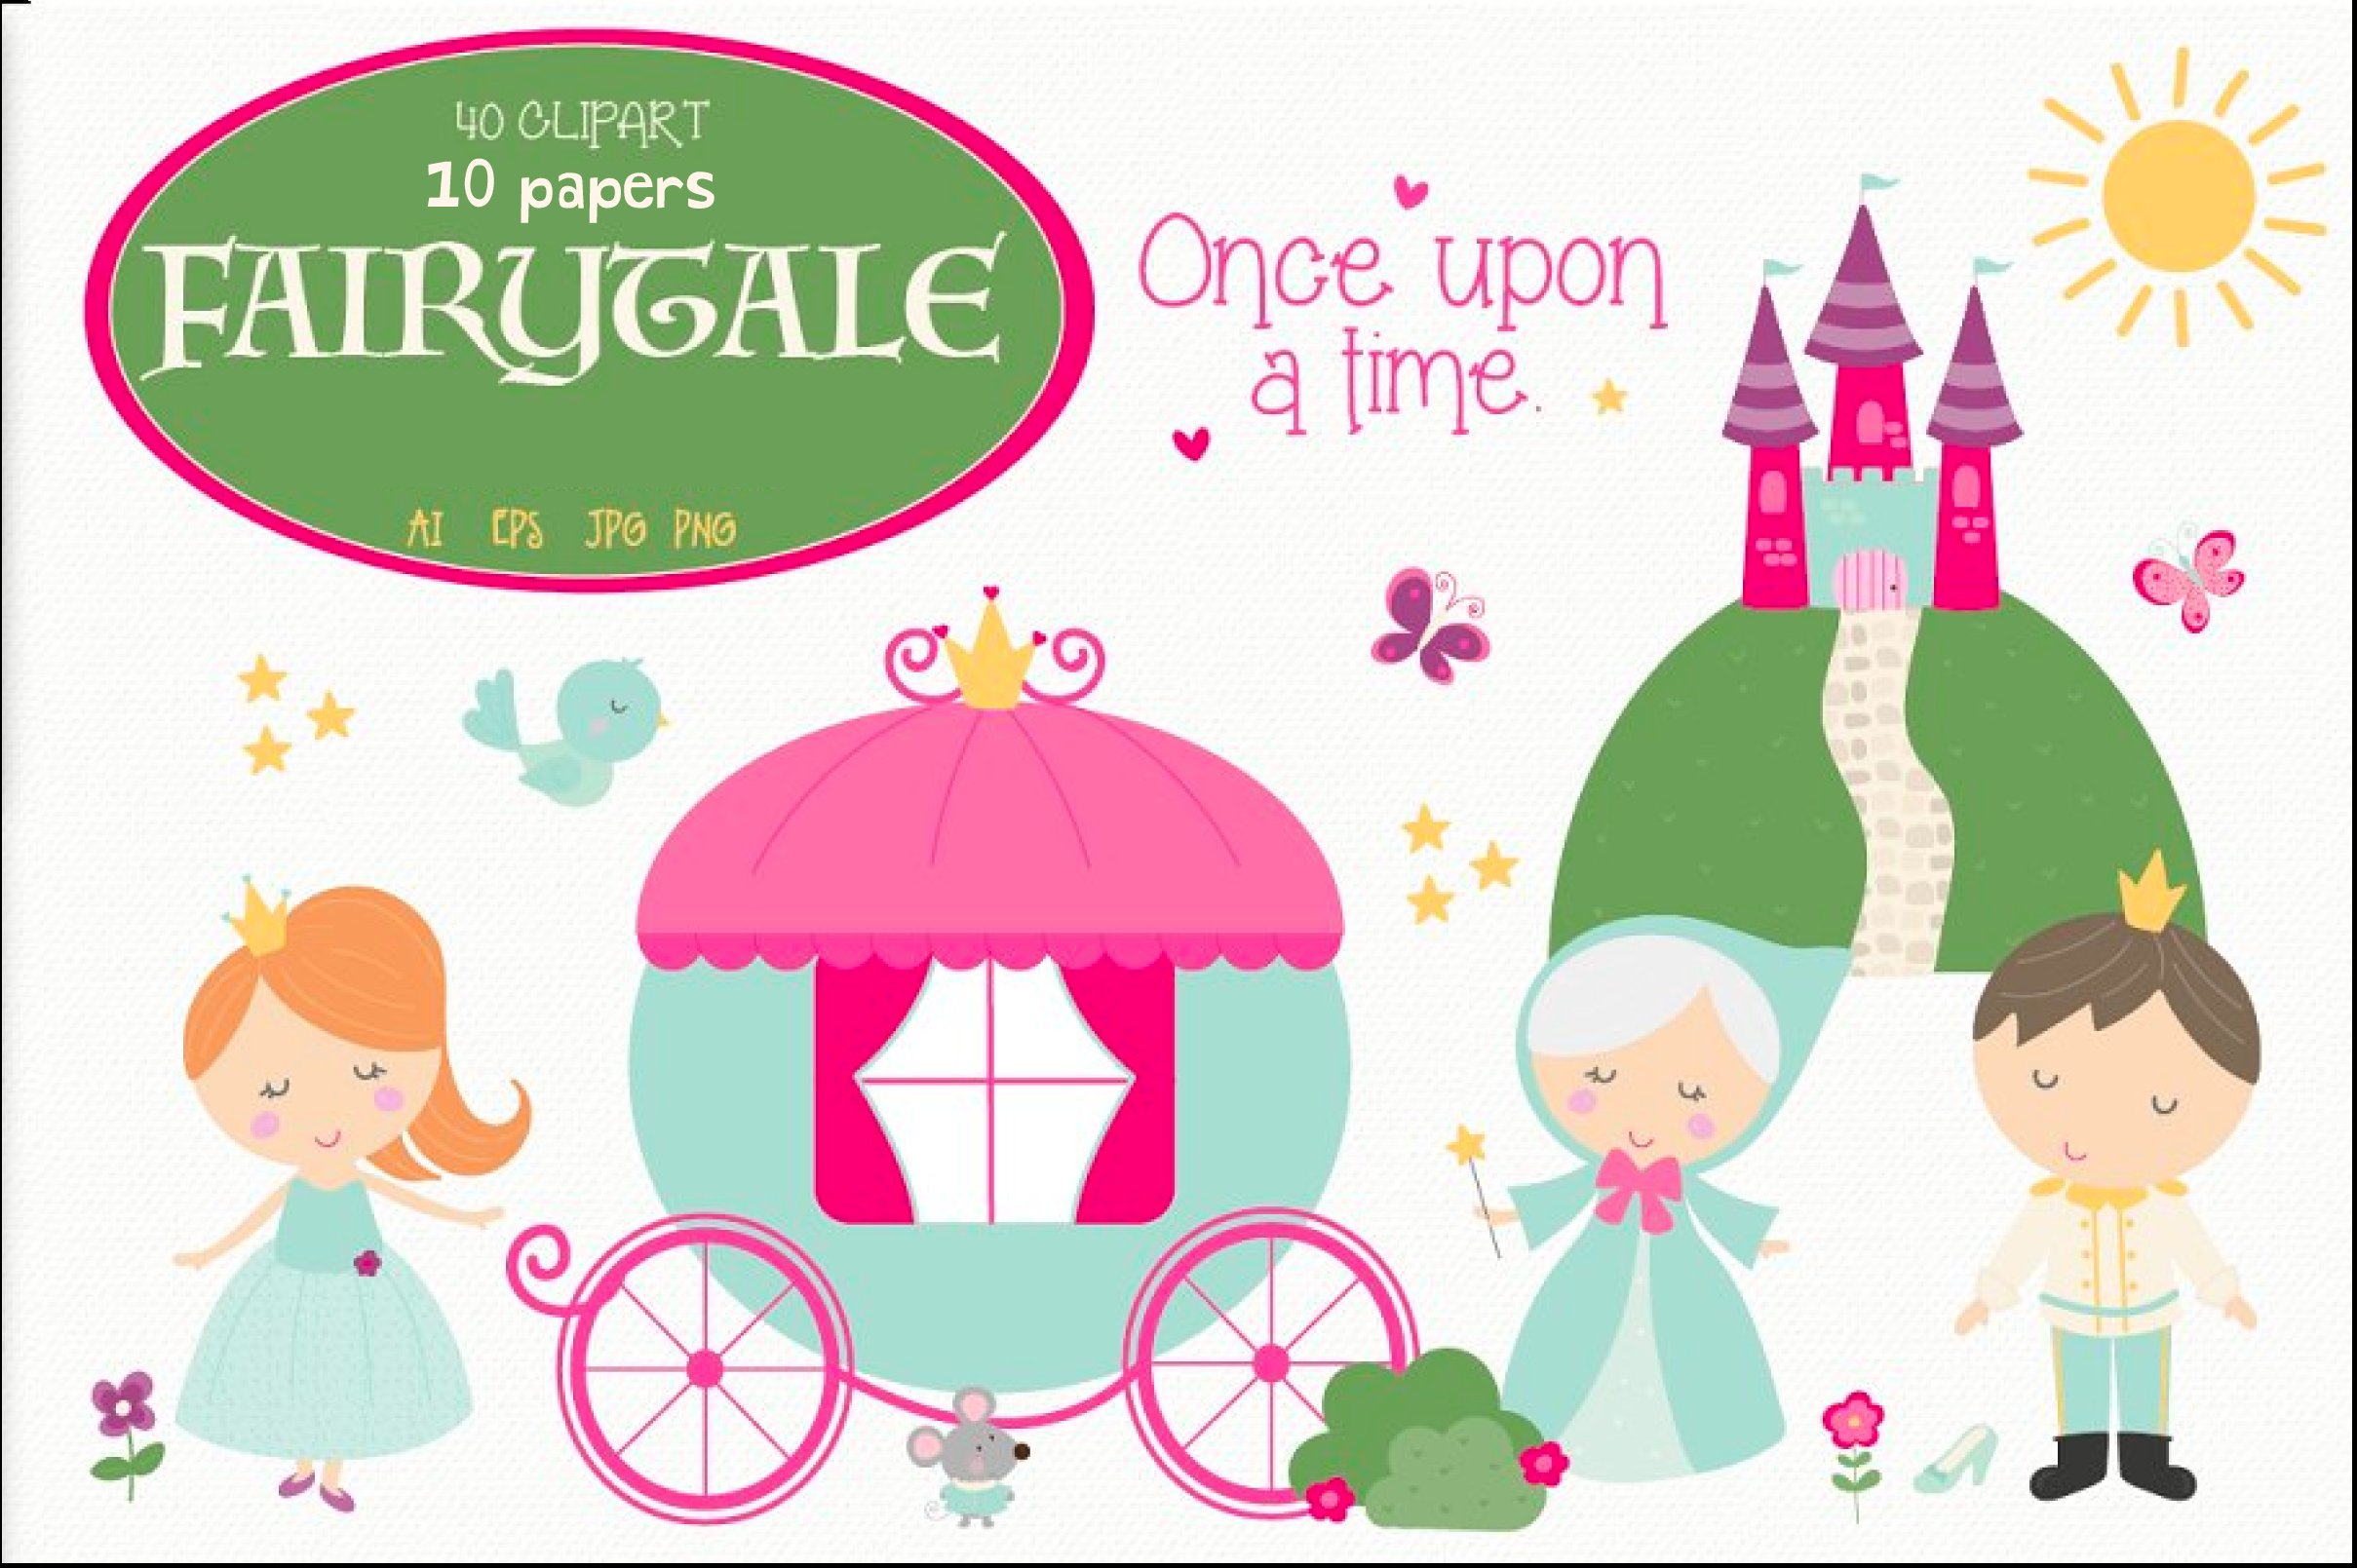 Fairytale clipart and paper pack cover image.